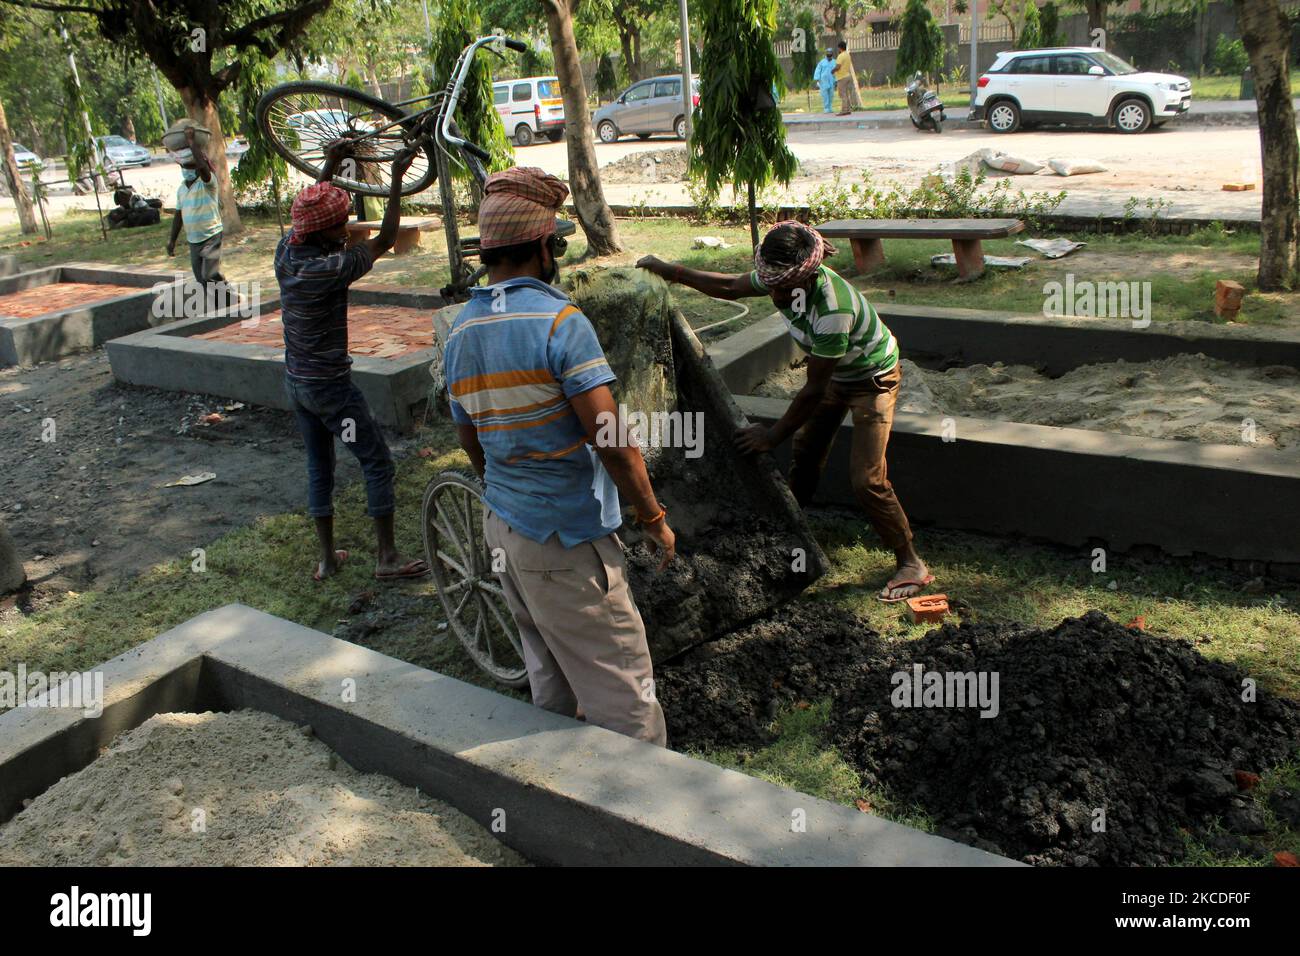 Workers construct new platforms to cremate bodies inside a crematorium, amidst the rising coronavirus cases in New Delhi on April 26, 2021. India recorded over 3.52 lakh new Covid-19 cases in the 24 hours, taking the country’s total infections to over 1.73 crore. With 2,812 new fatalities, the death toll is now over 1.95 lakh. (Photo by Mayank Makhija/NurPhoto) Stock Photo